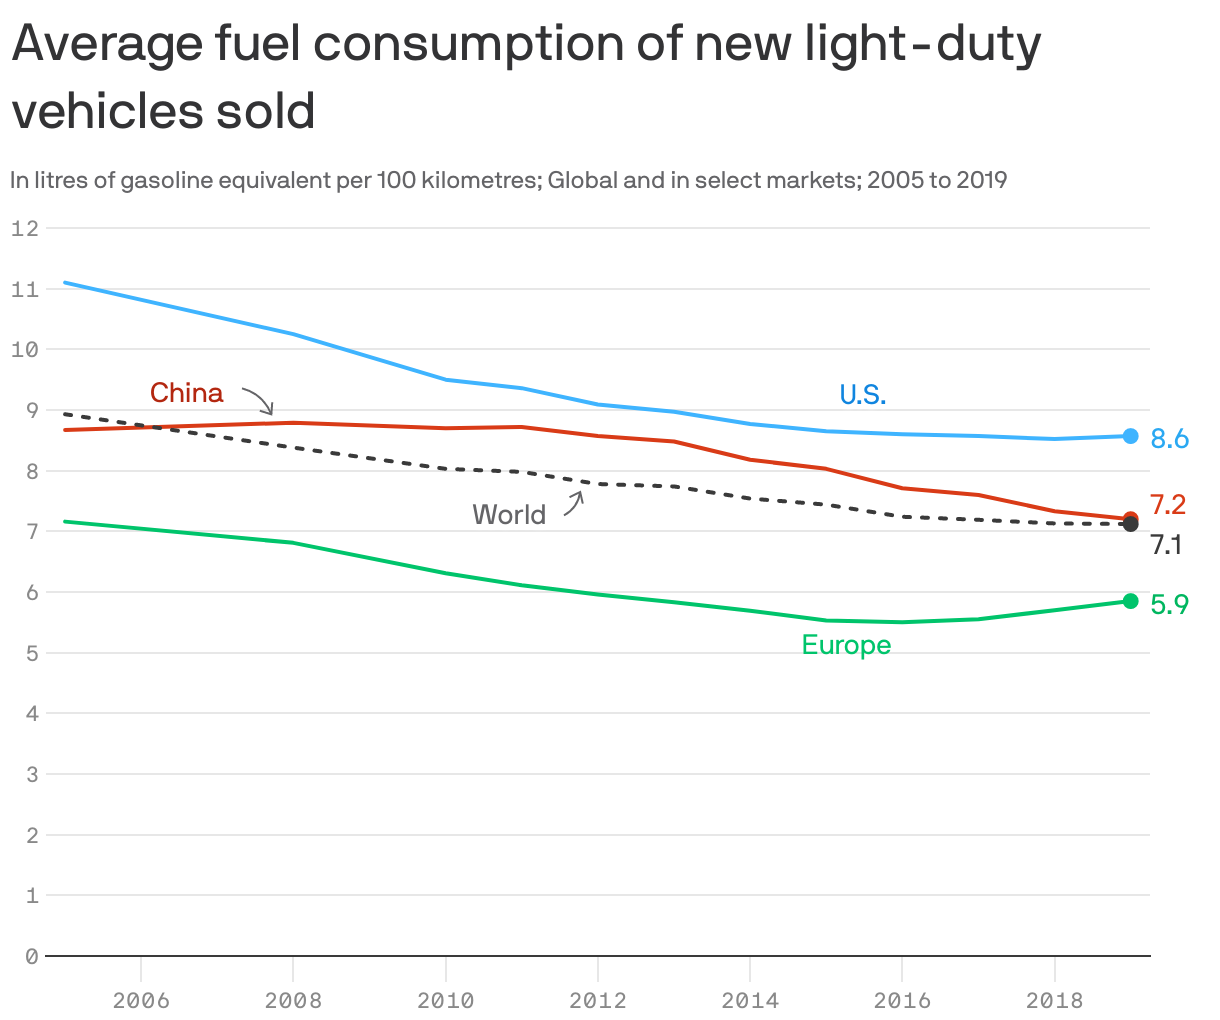 Average fuel consumption of new light-duty vehicles sold